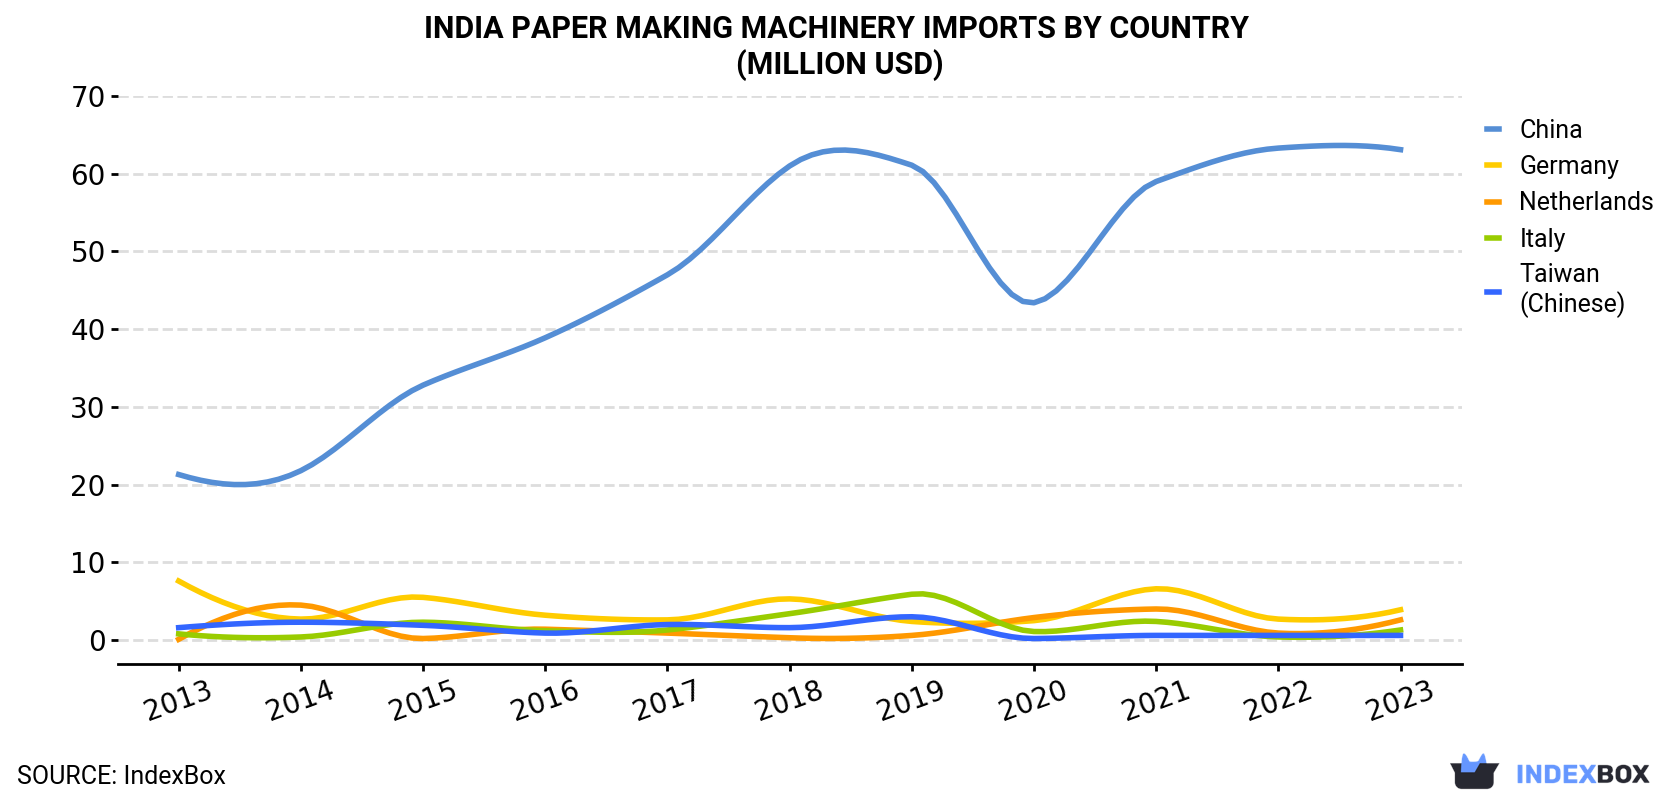 India Paper Making Machinery Imports By Country (Million USD)